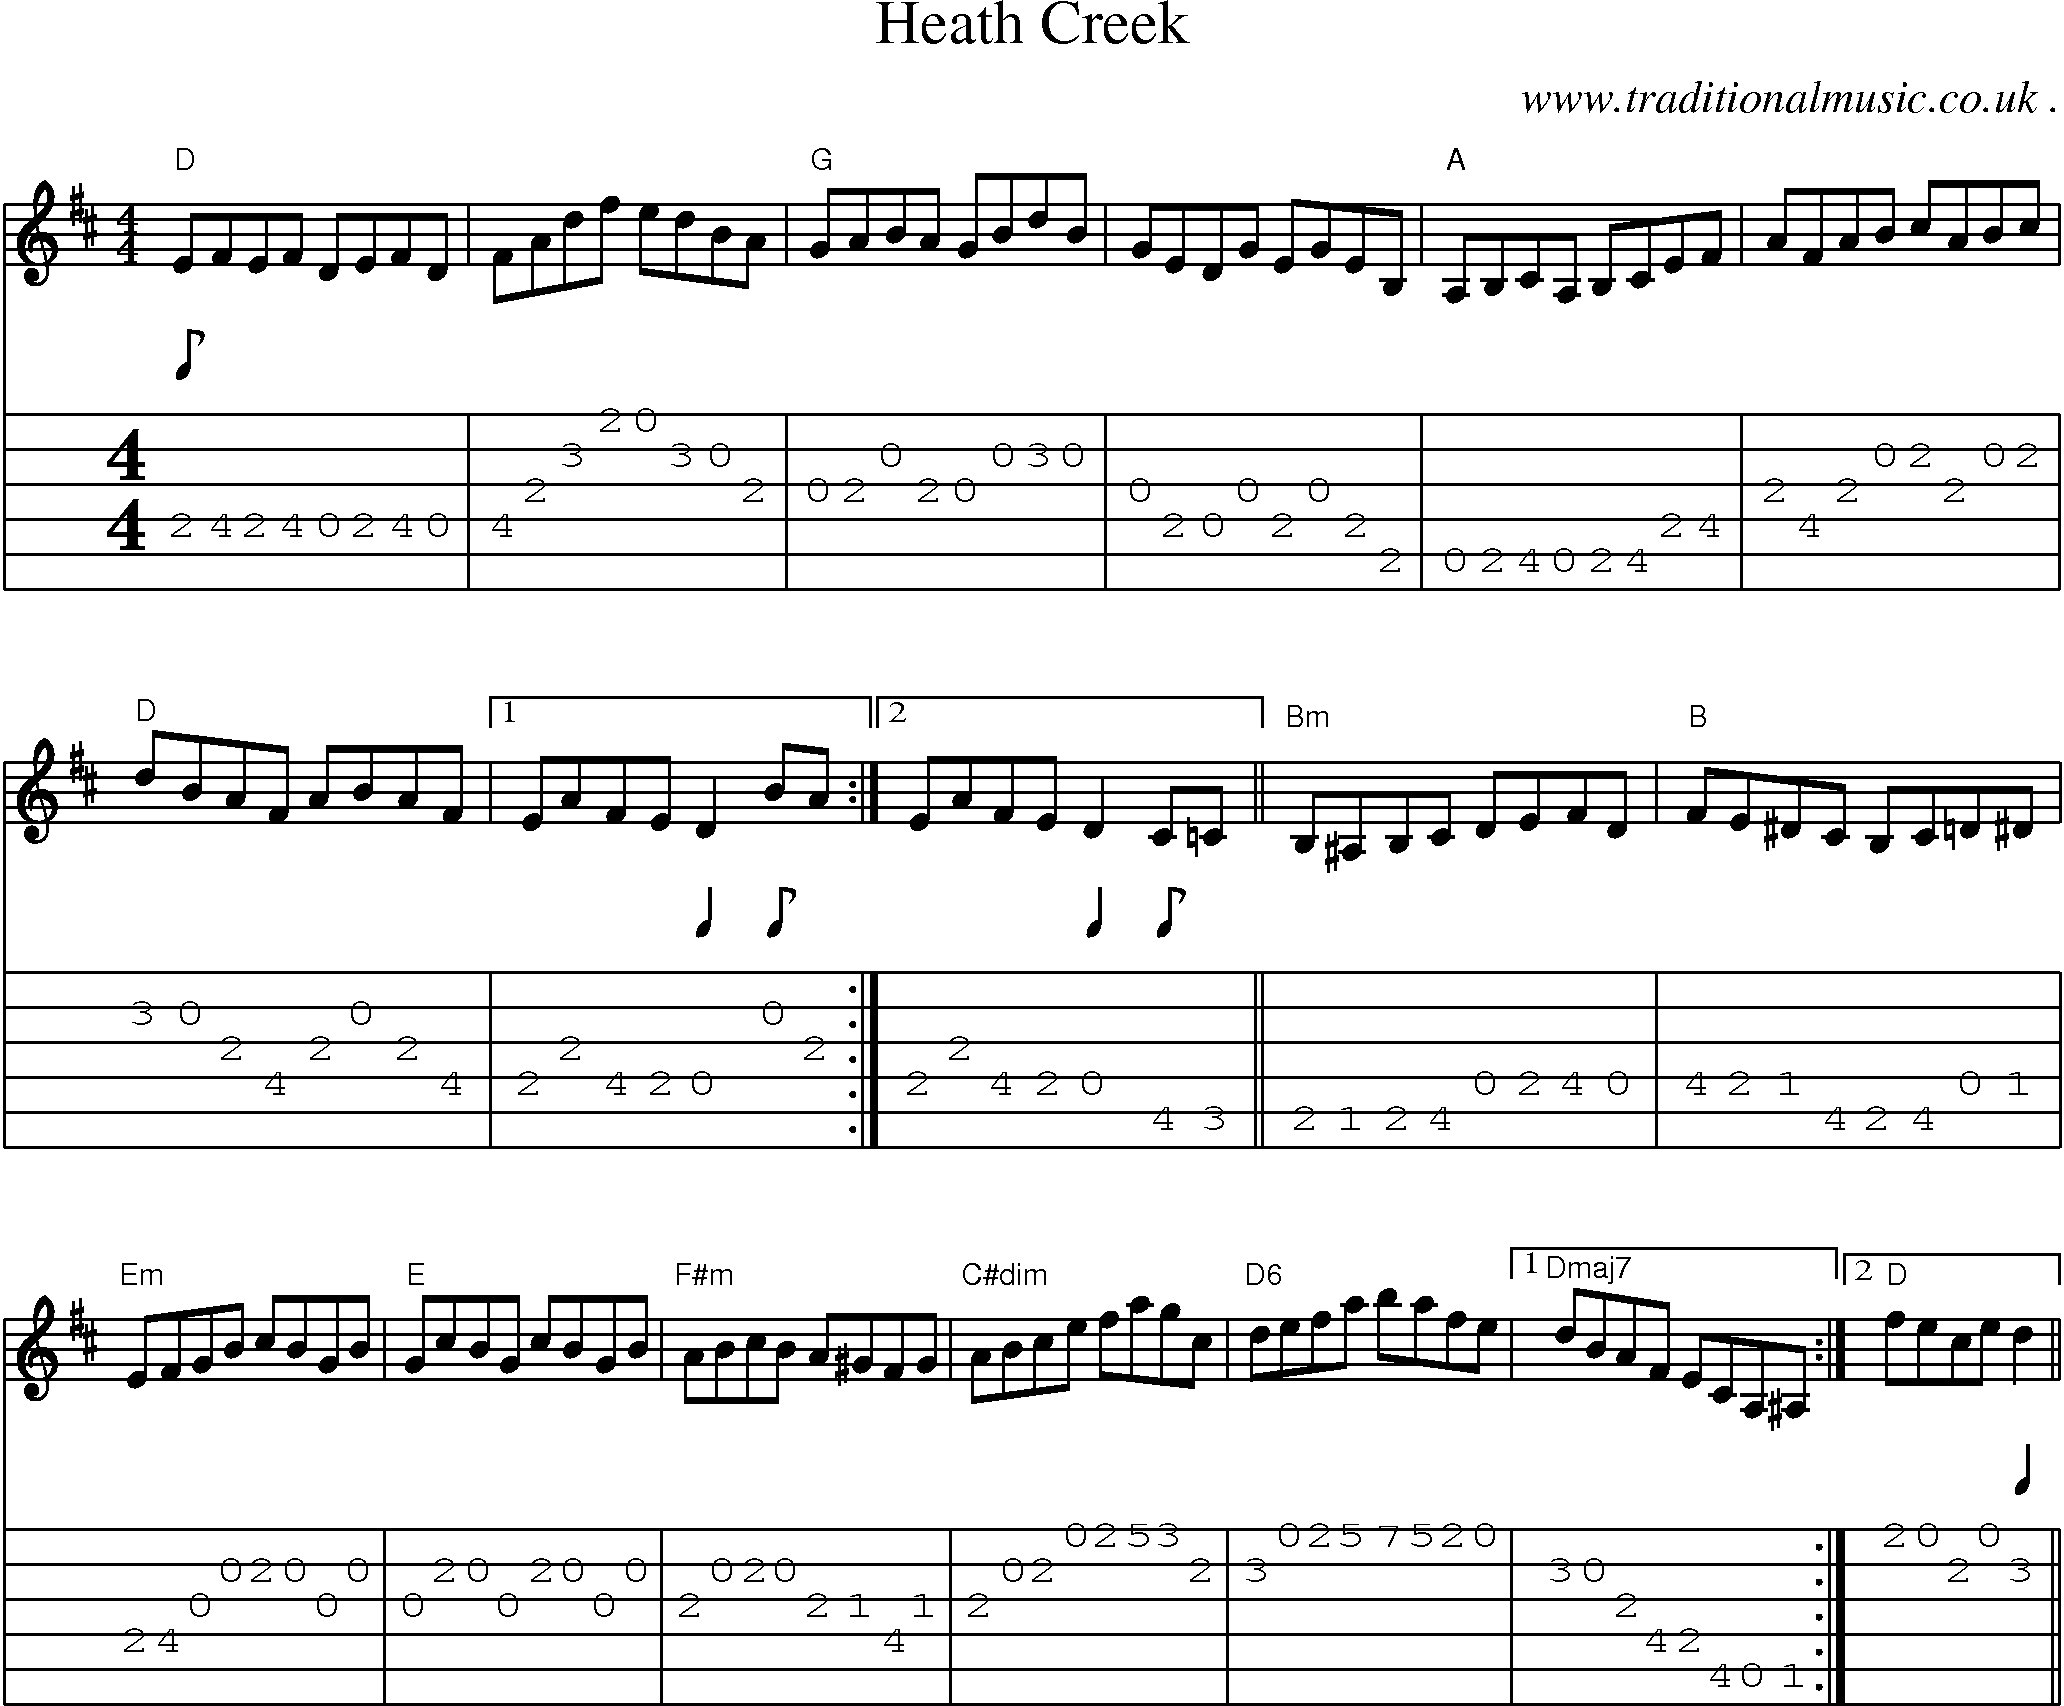 Music Score and Guitar Tabs for Heath Creek